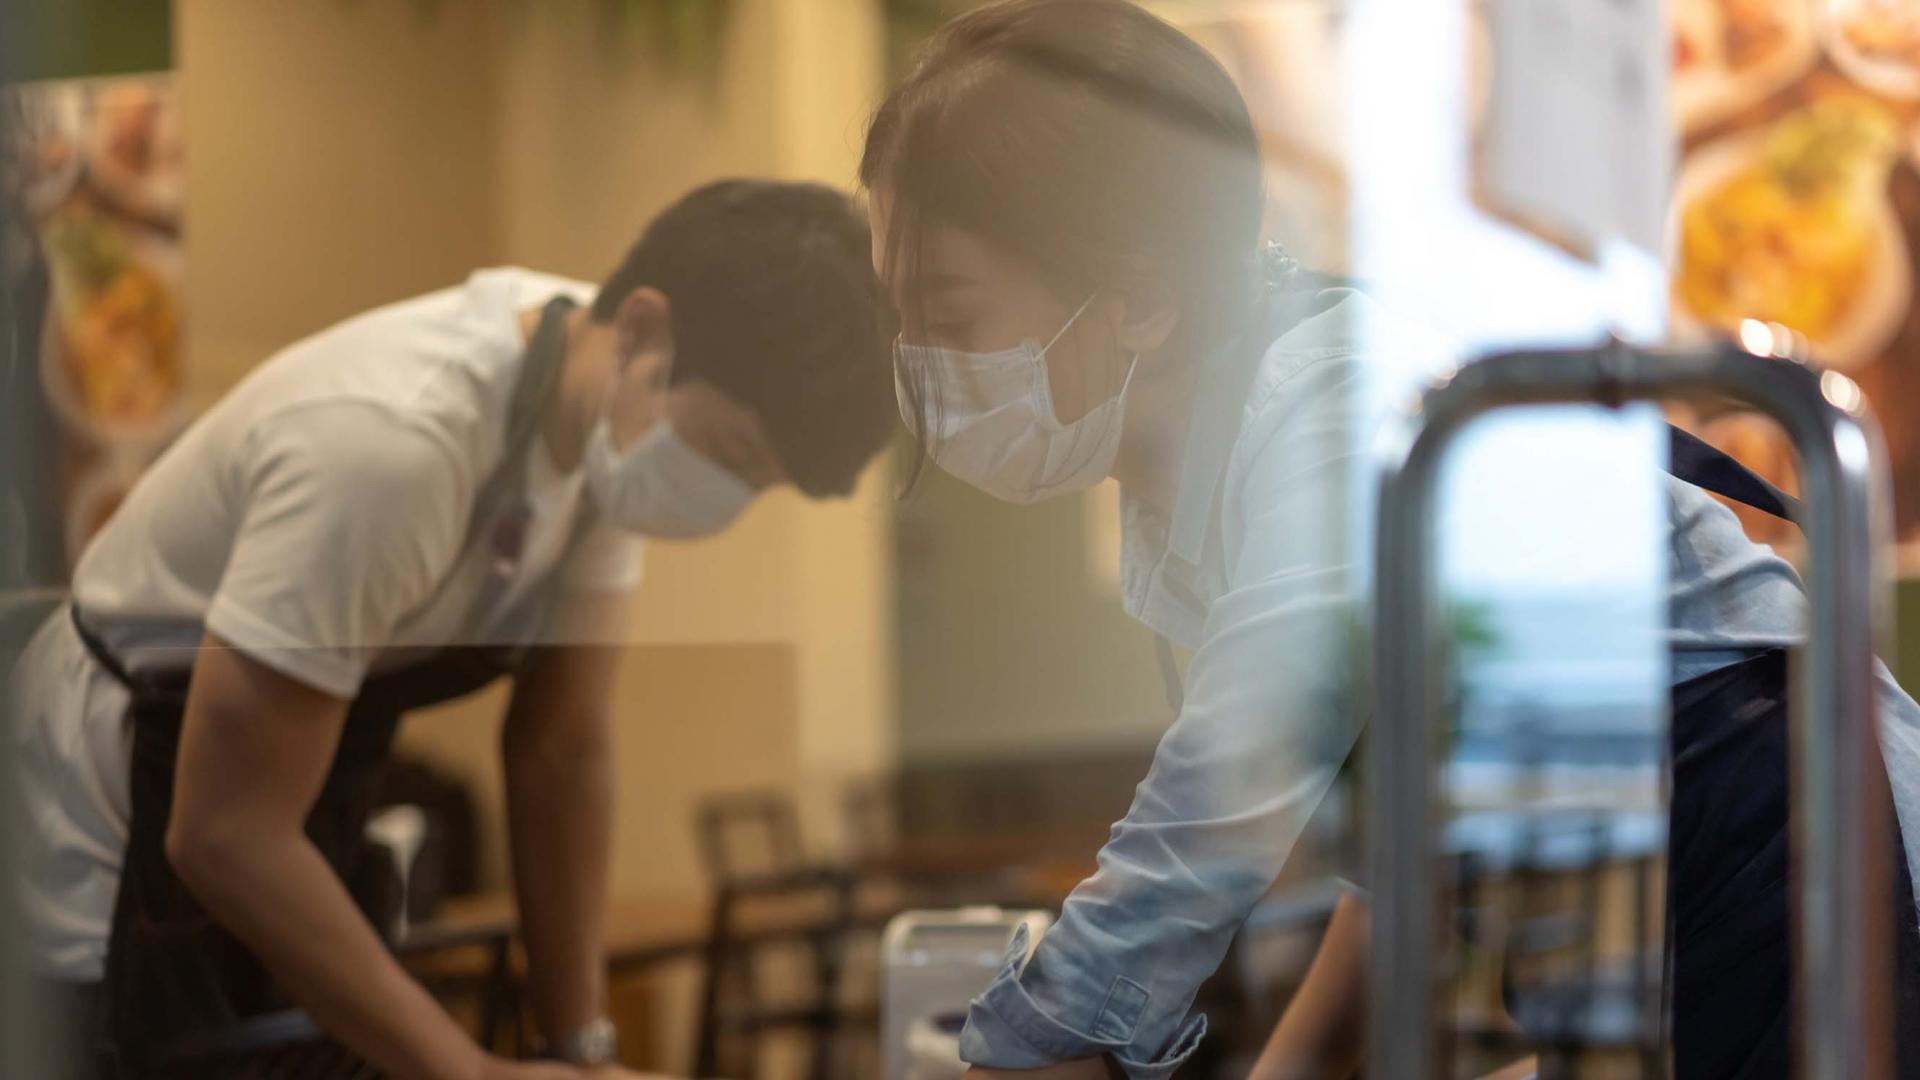 Cafe cleaners wearing masks